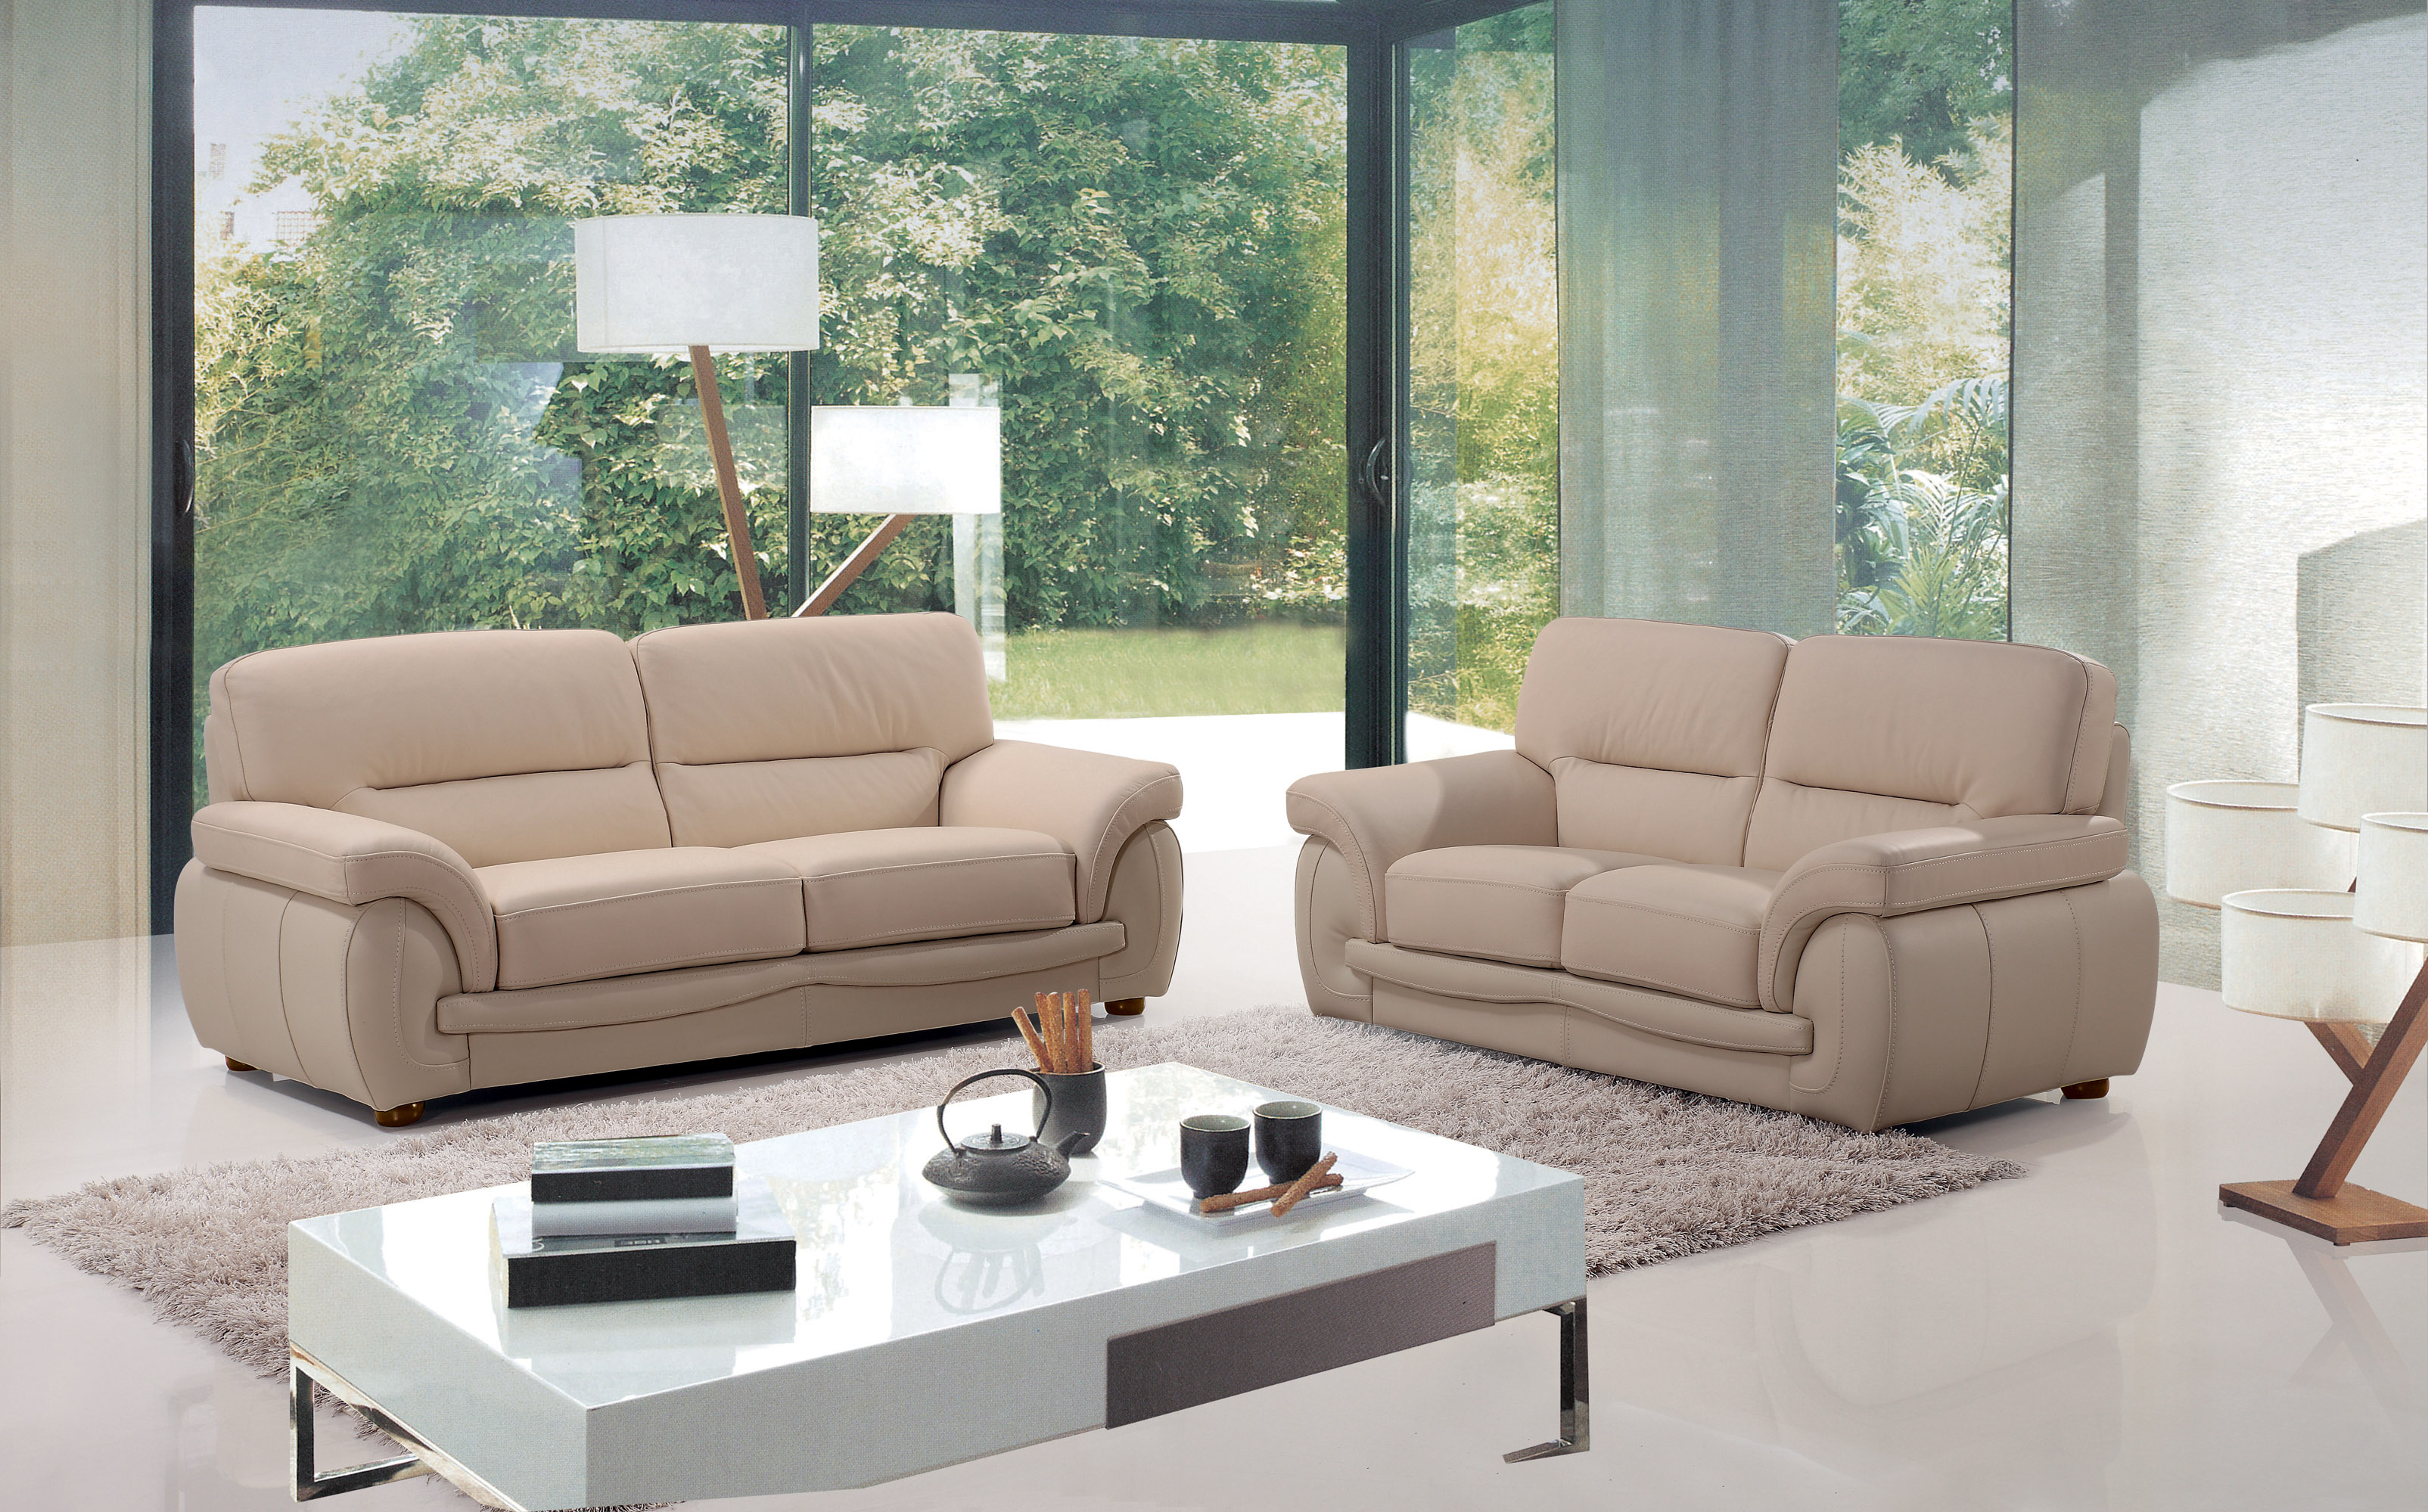 Beige Leather Sofas With Wooden Legs Extra Padded Bh Sienna 